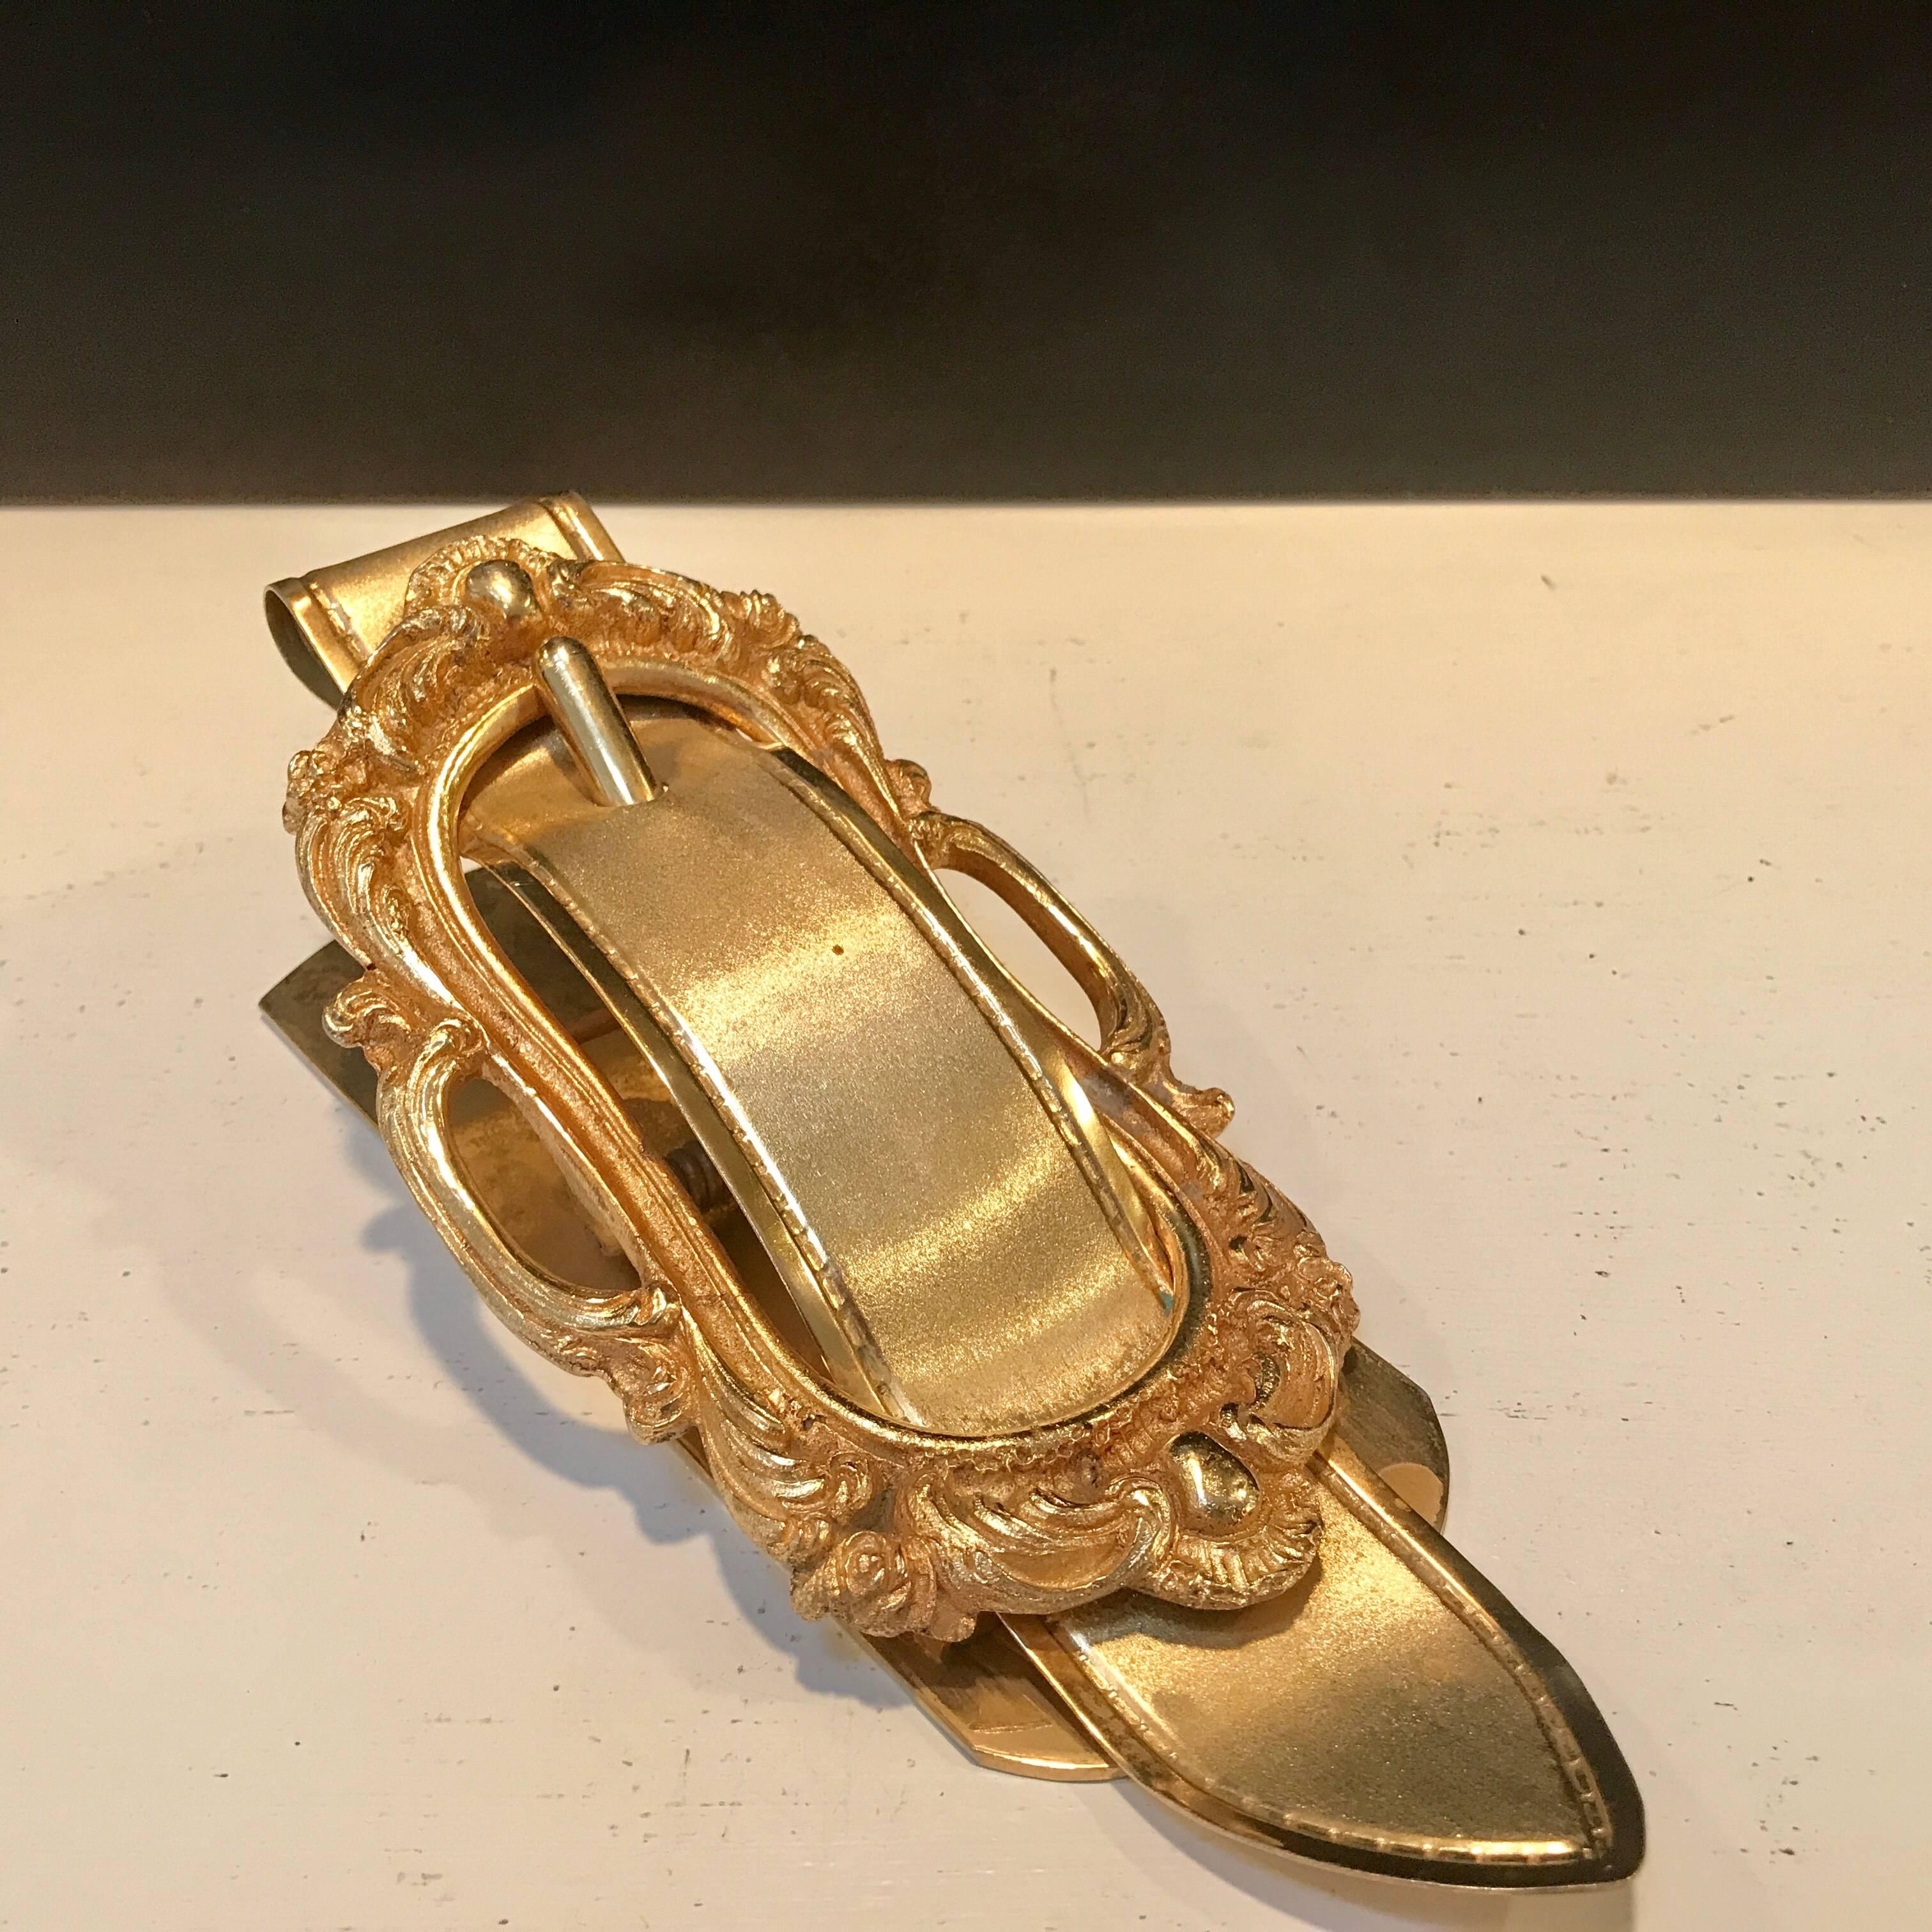 Italian gilt bronze buckle motif desk clip, in the style of Gucci, retailed by Saks Fifth Avenue.